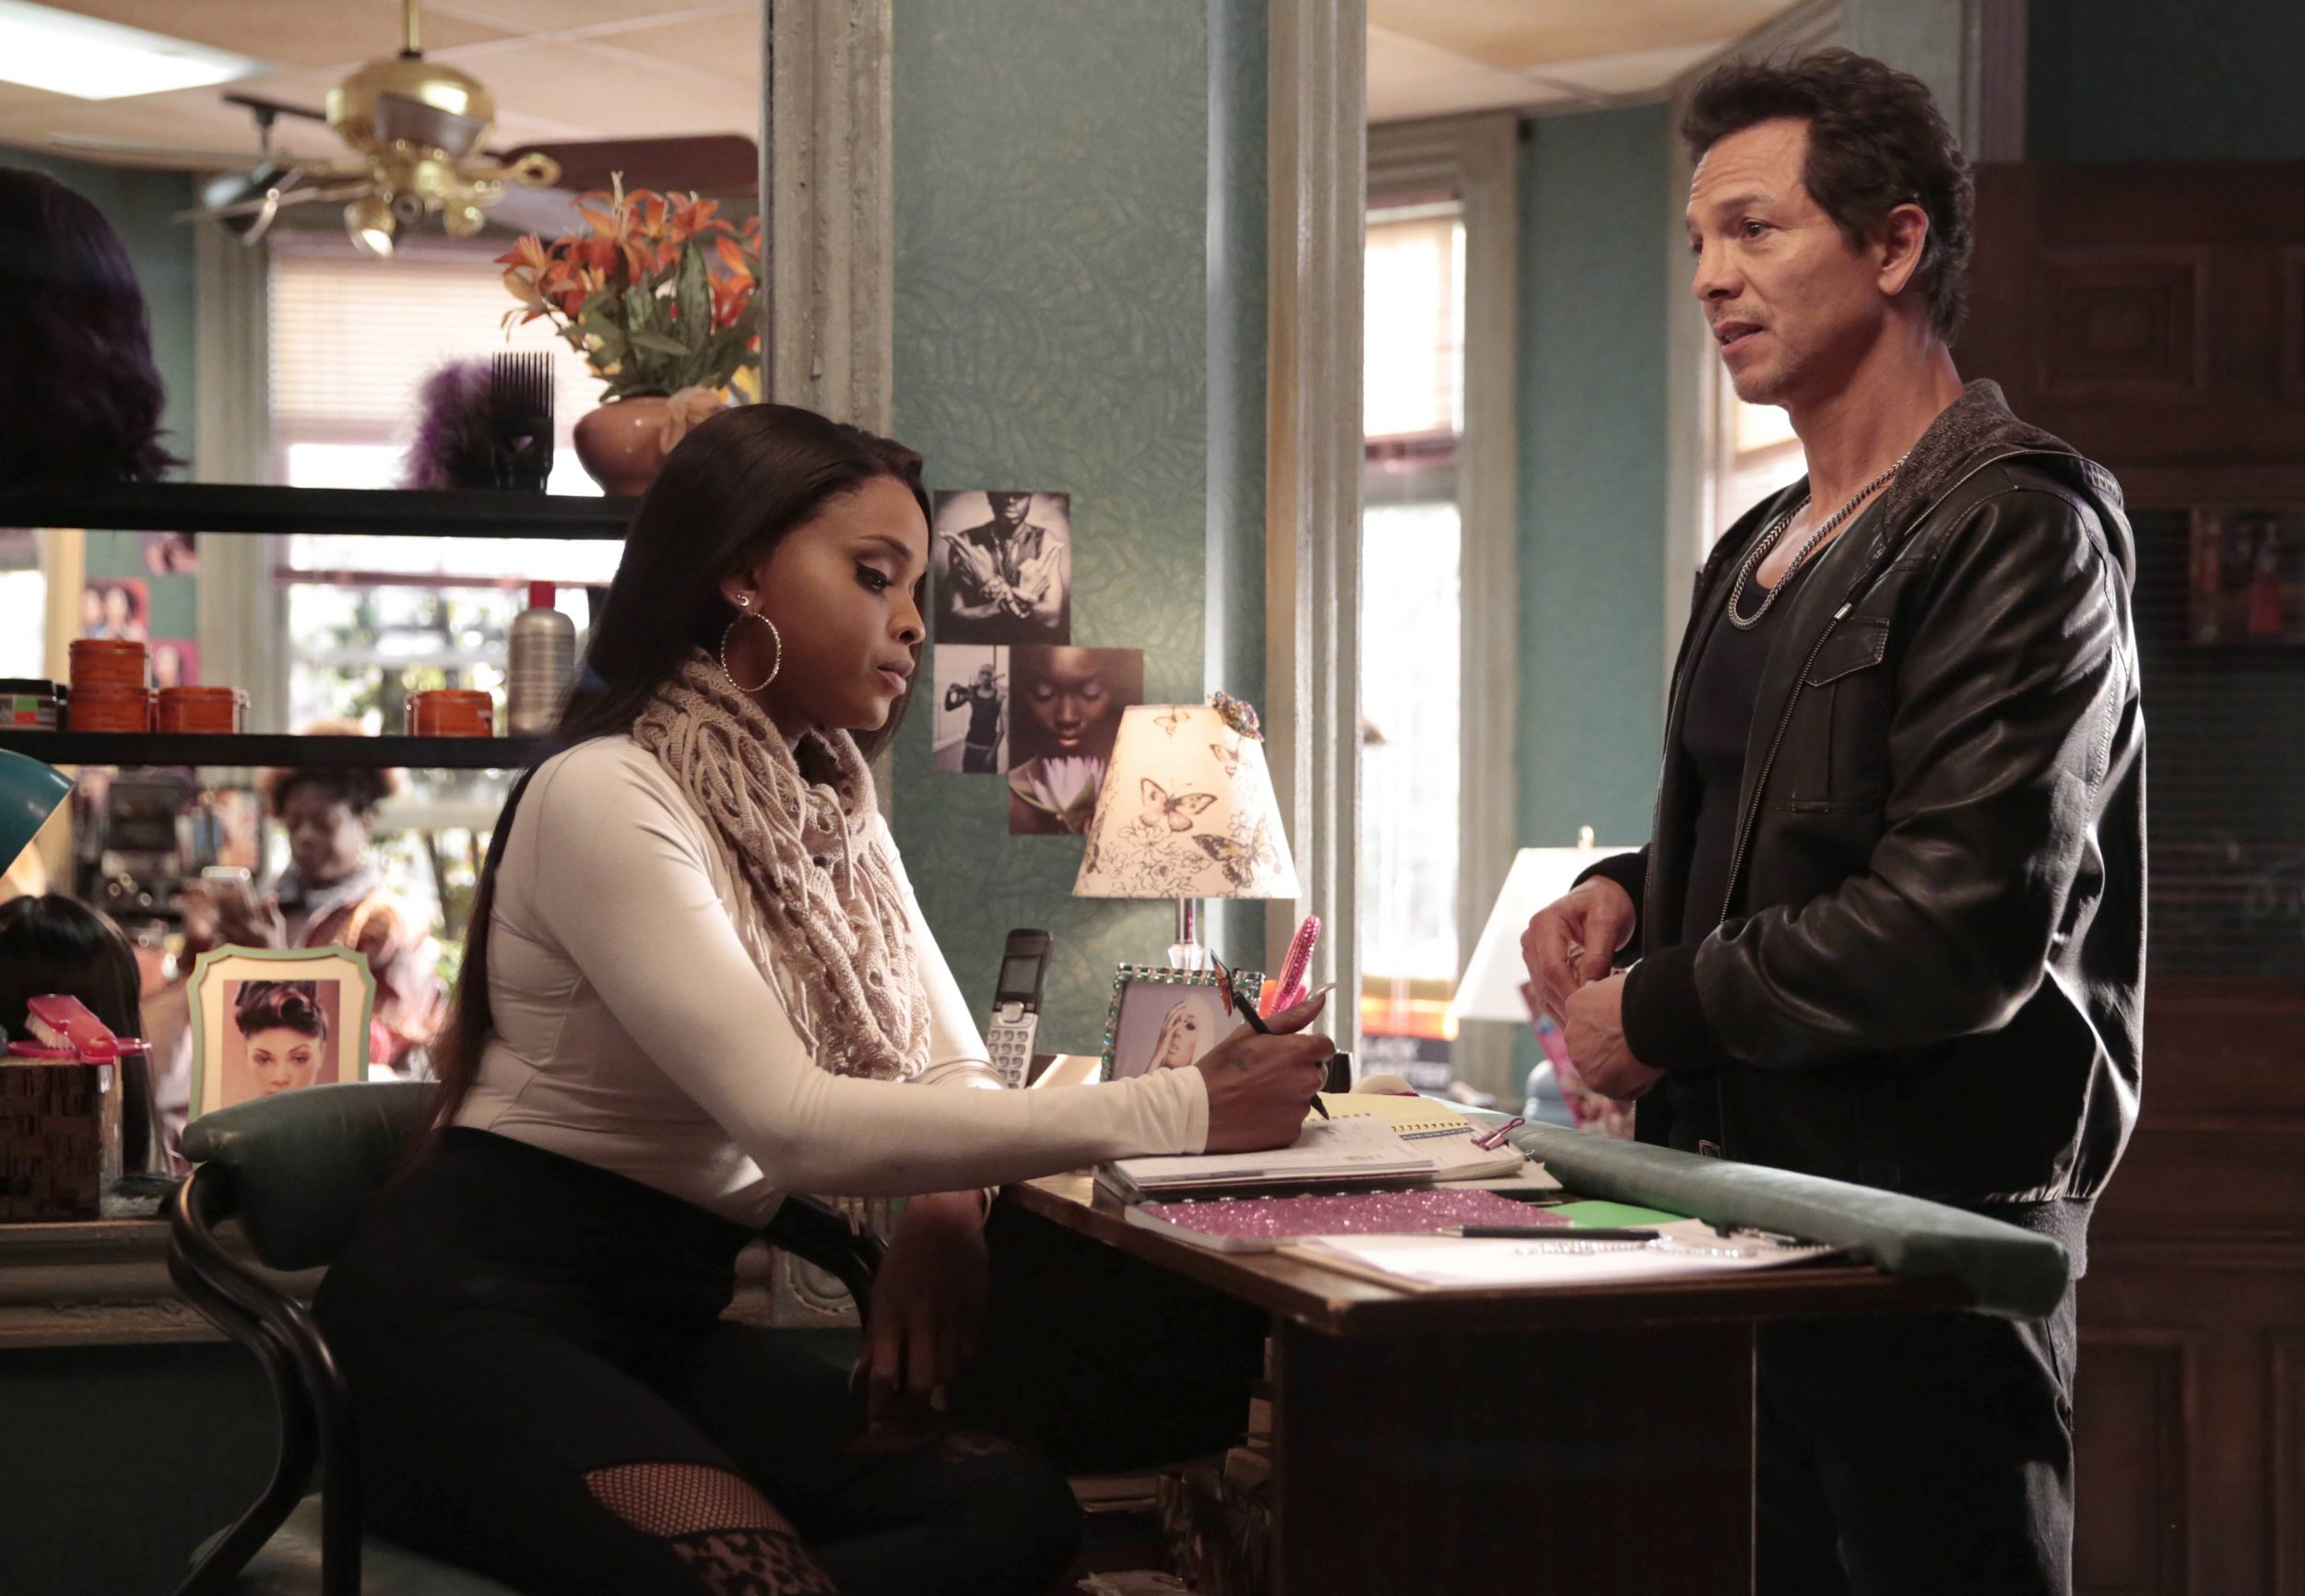 STAR: Pictured L-R: Amiyah Scott and Benjamin Bratt in the "New Voices" episode of STAR airing Wednesday, Jan. 25 (9:01-10:00 PM ET/PT) on FOX. ©2016 Fox Broadcasting Co. CR: Carin Baer/FOX